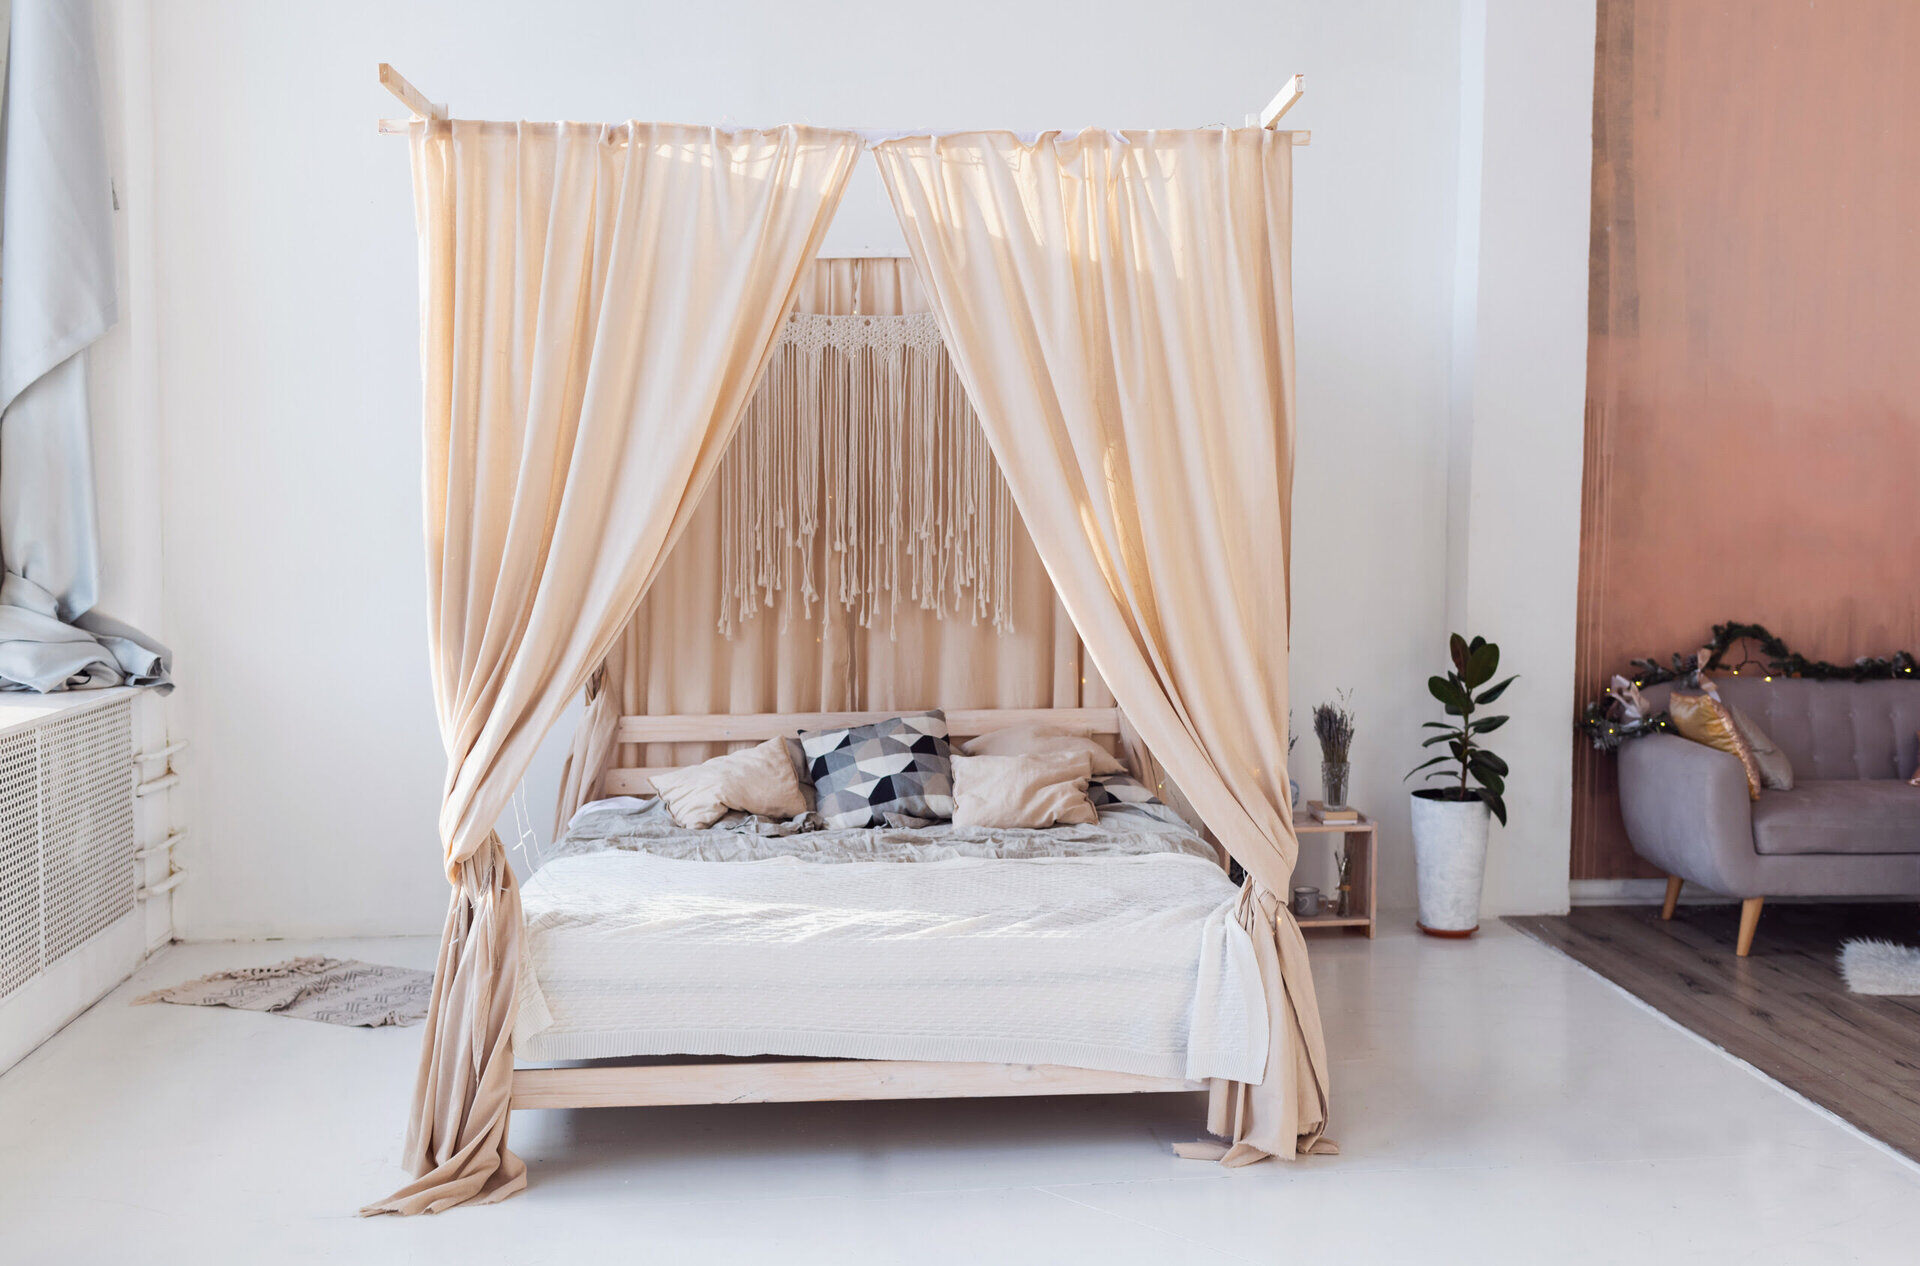 How To Hang Curtains On A Canopy Bed